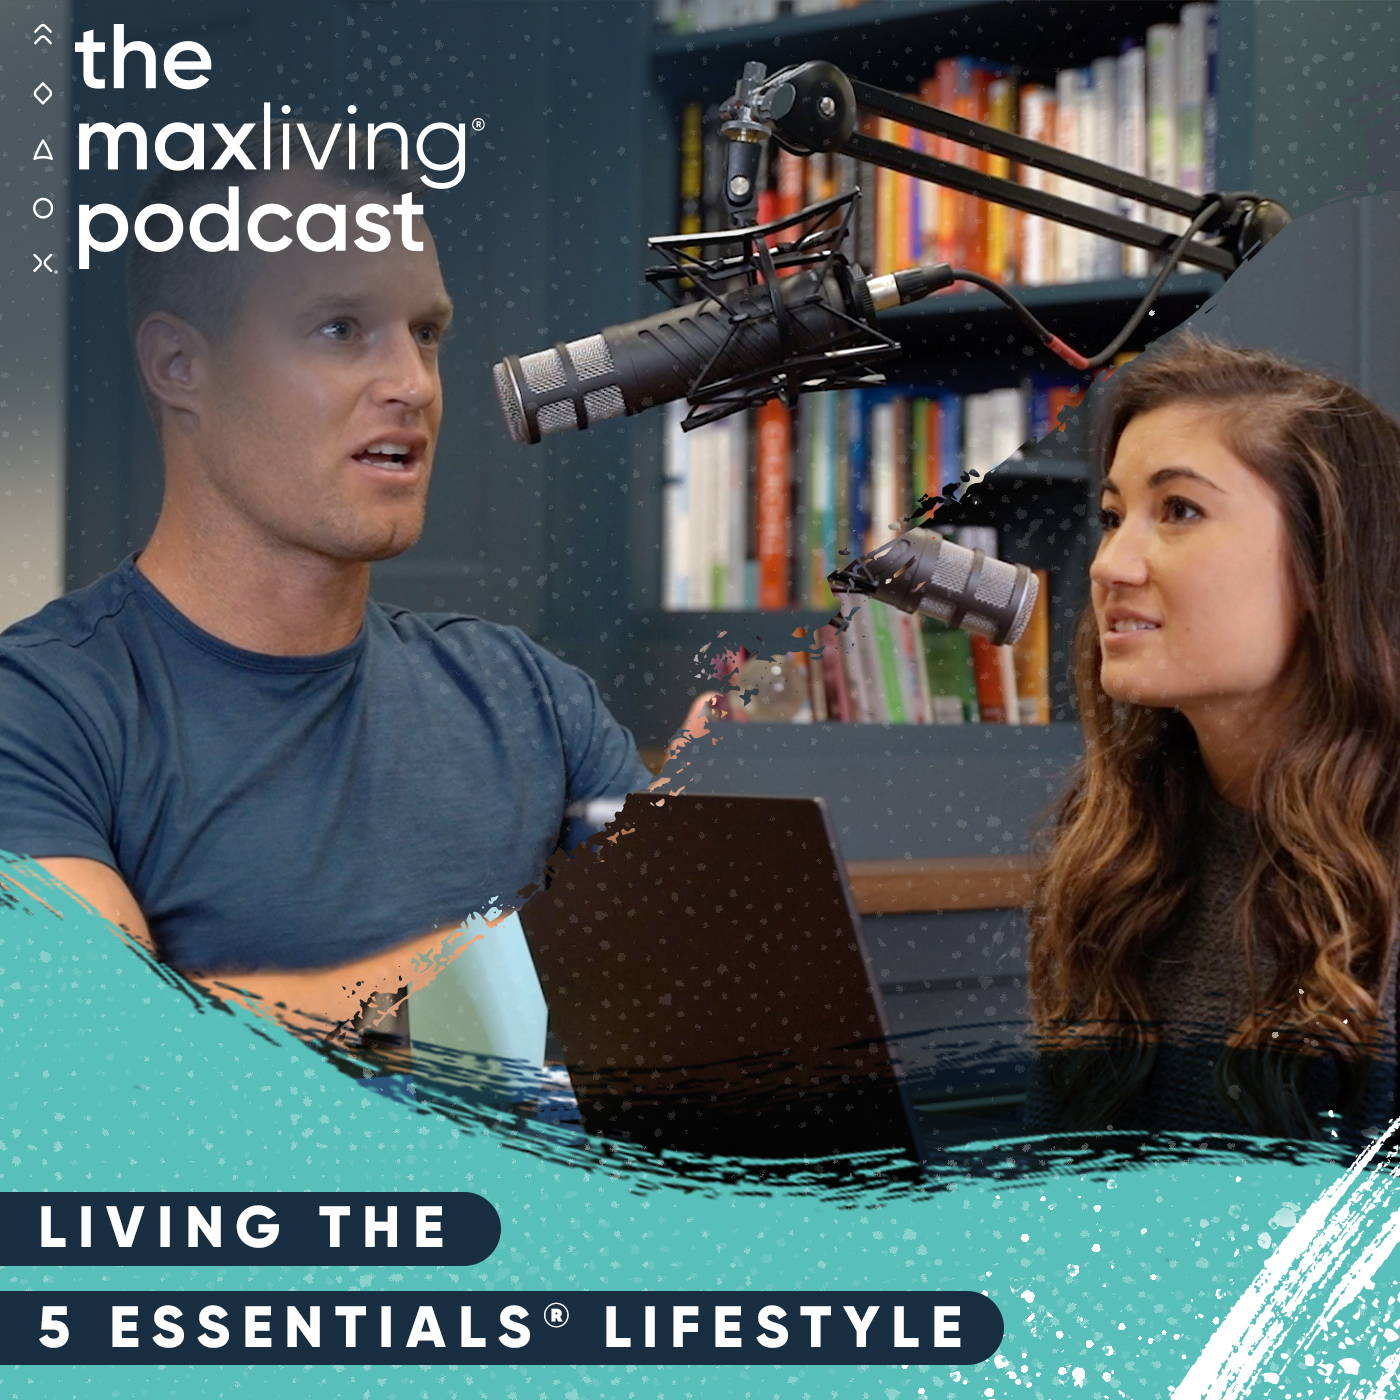 Episode 30 - Living the 5 Essentials® Lifestyle